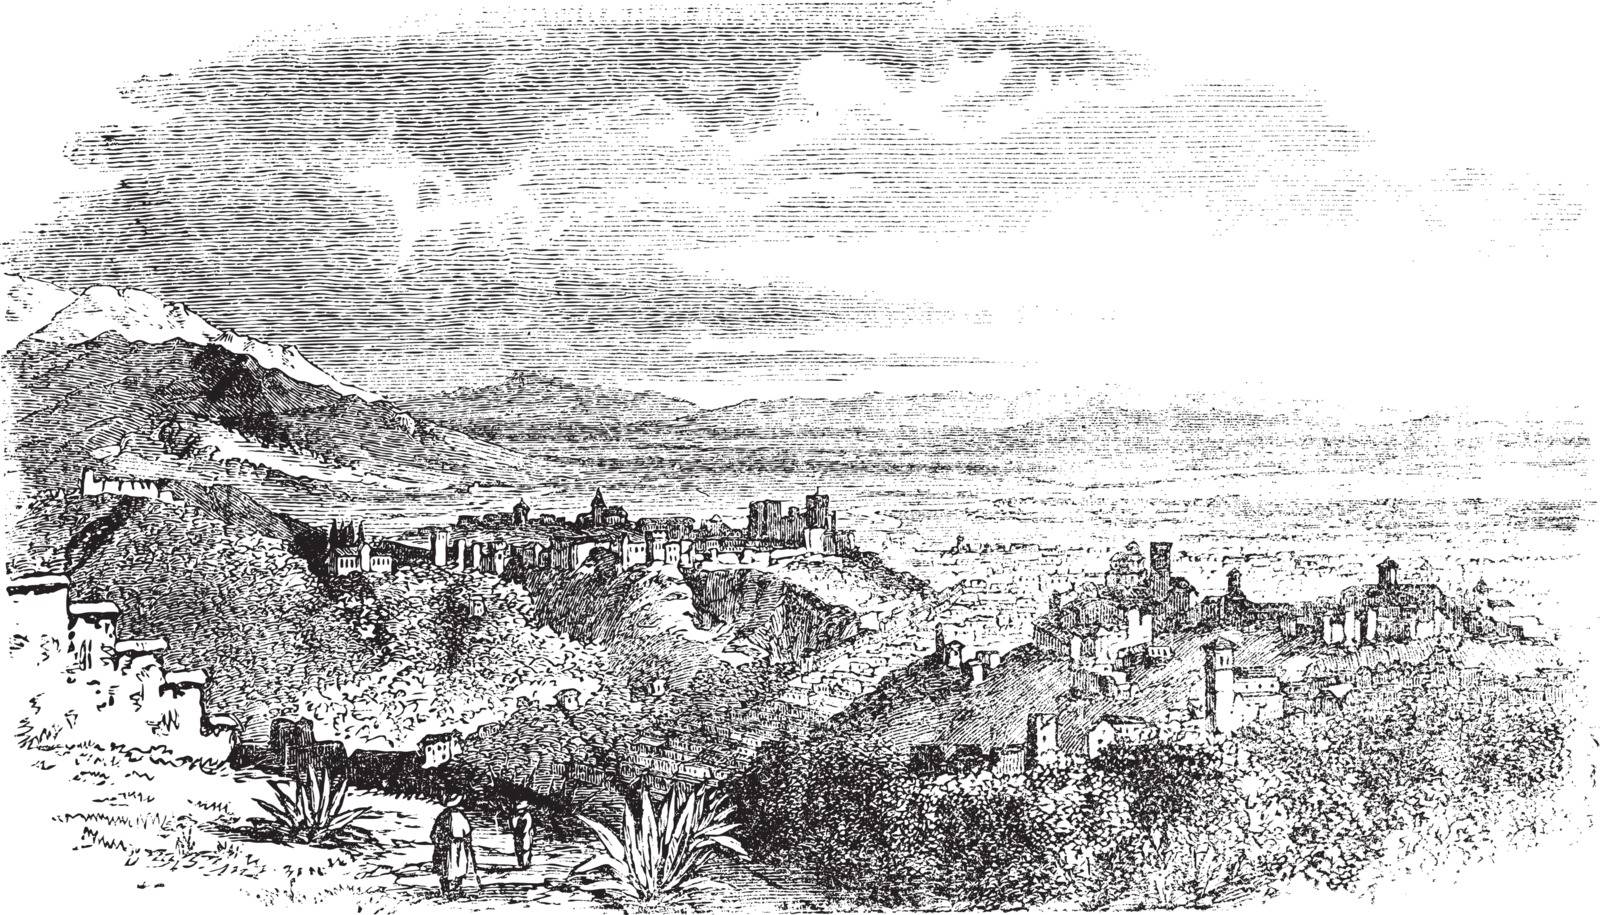 View of village at Granada, Andalusia, Spain vintage engraving. Old engraved illustration of countryside view of Granada,1890s.